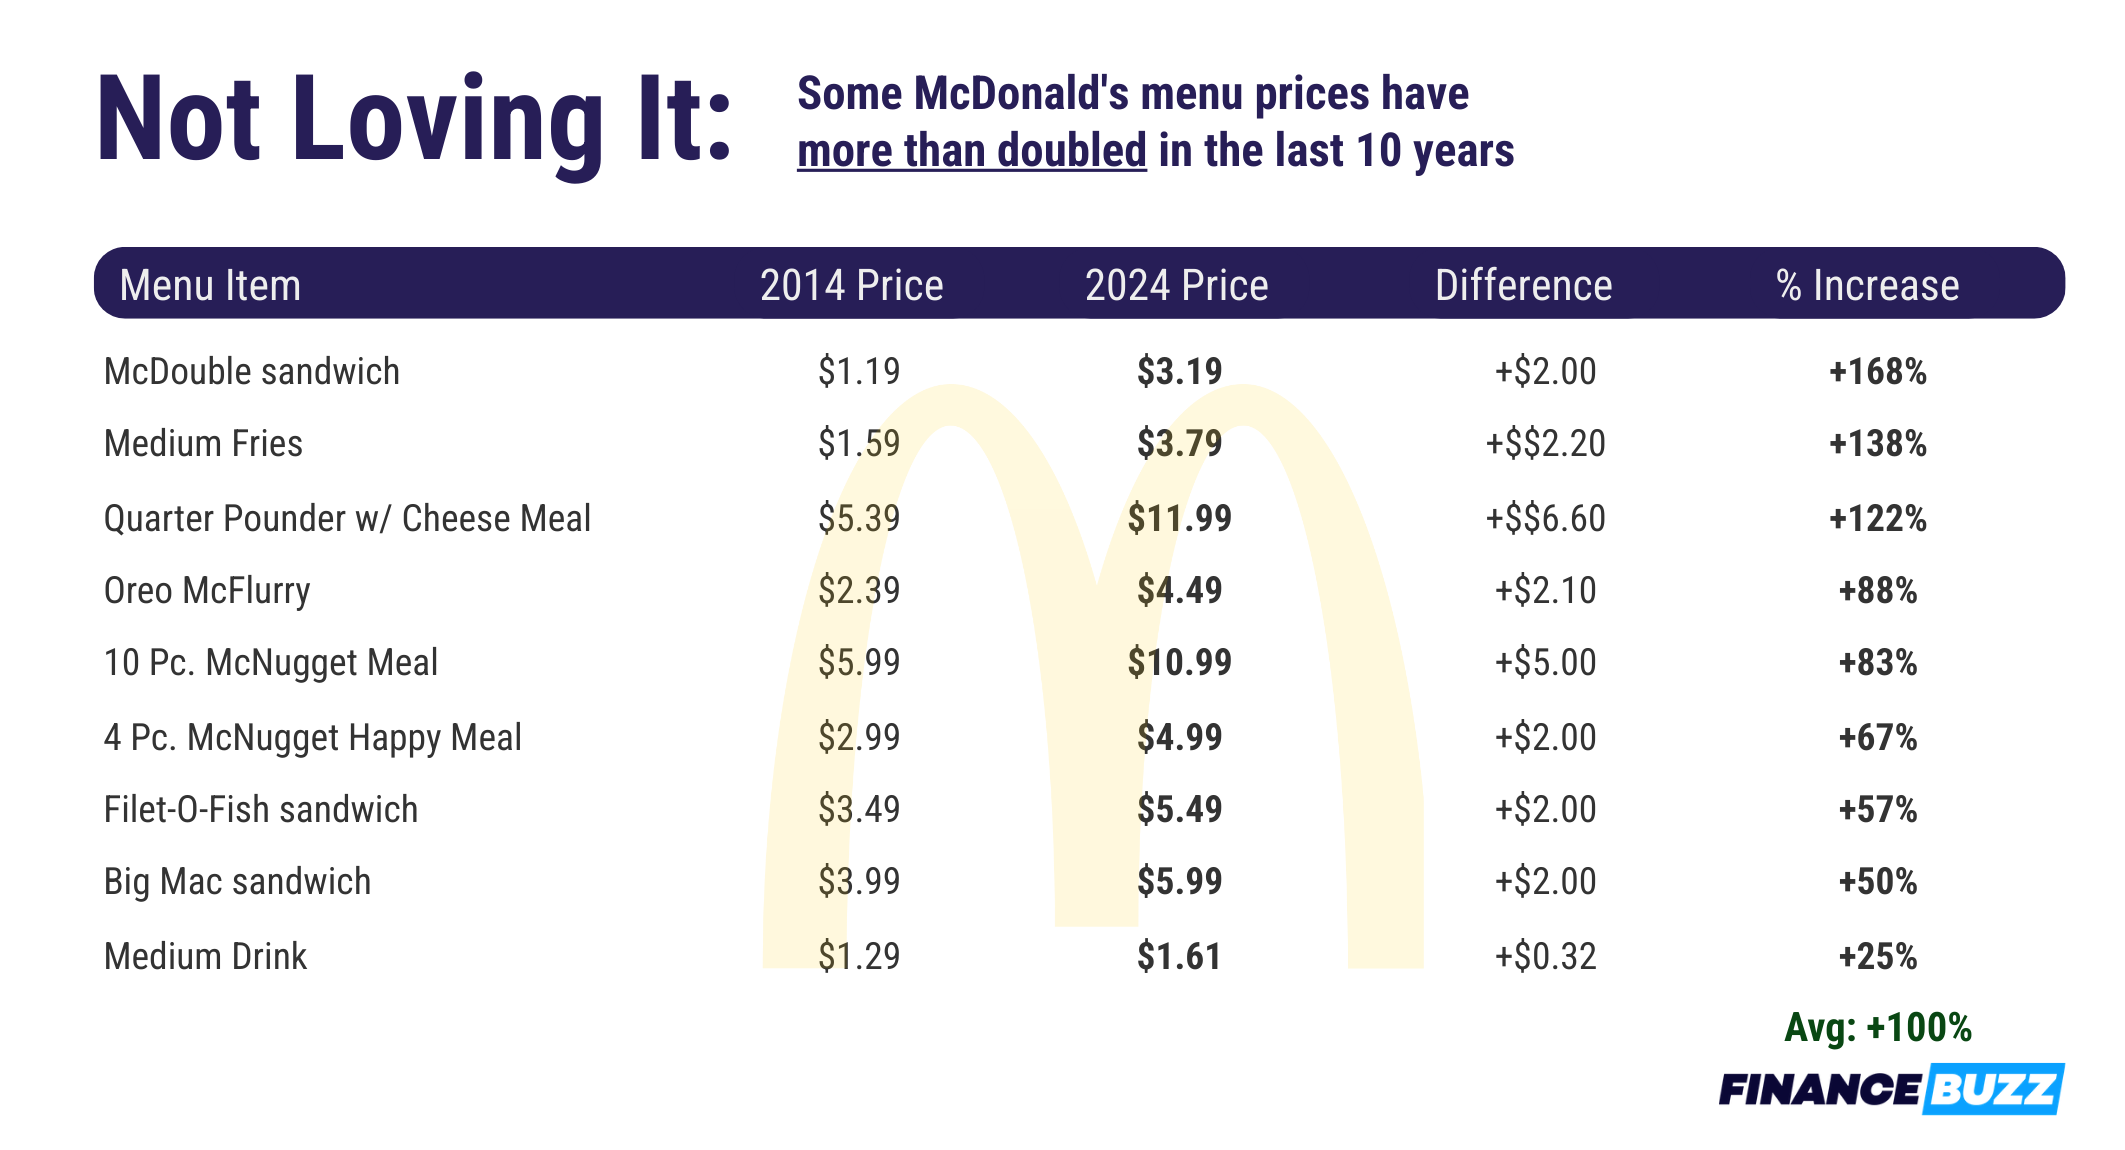 Table showing prices of Mcdonalds menu items.